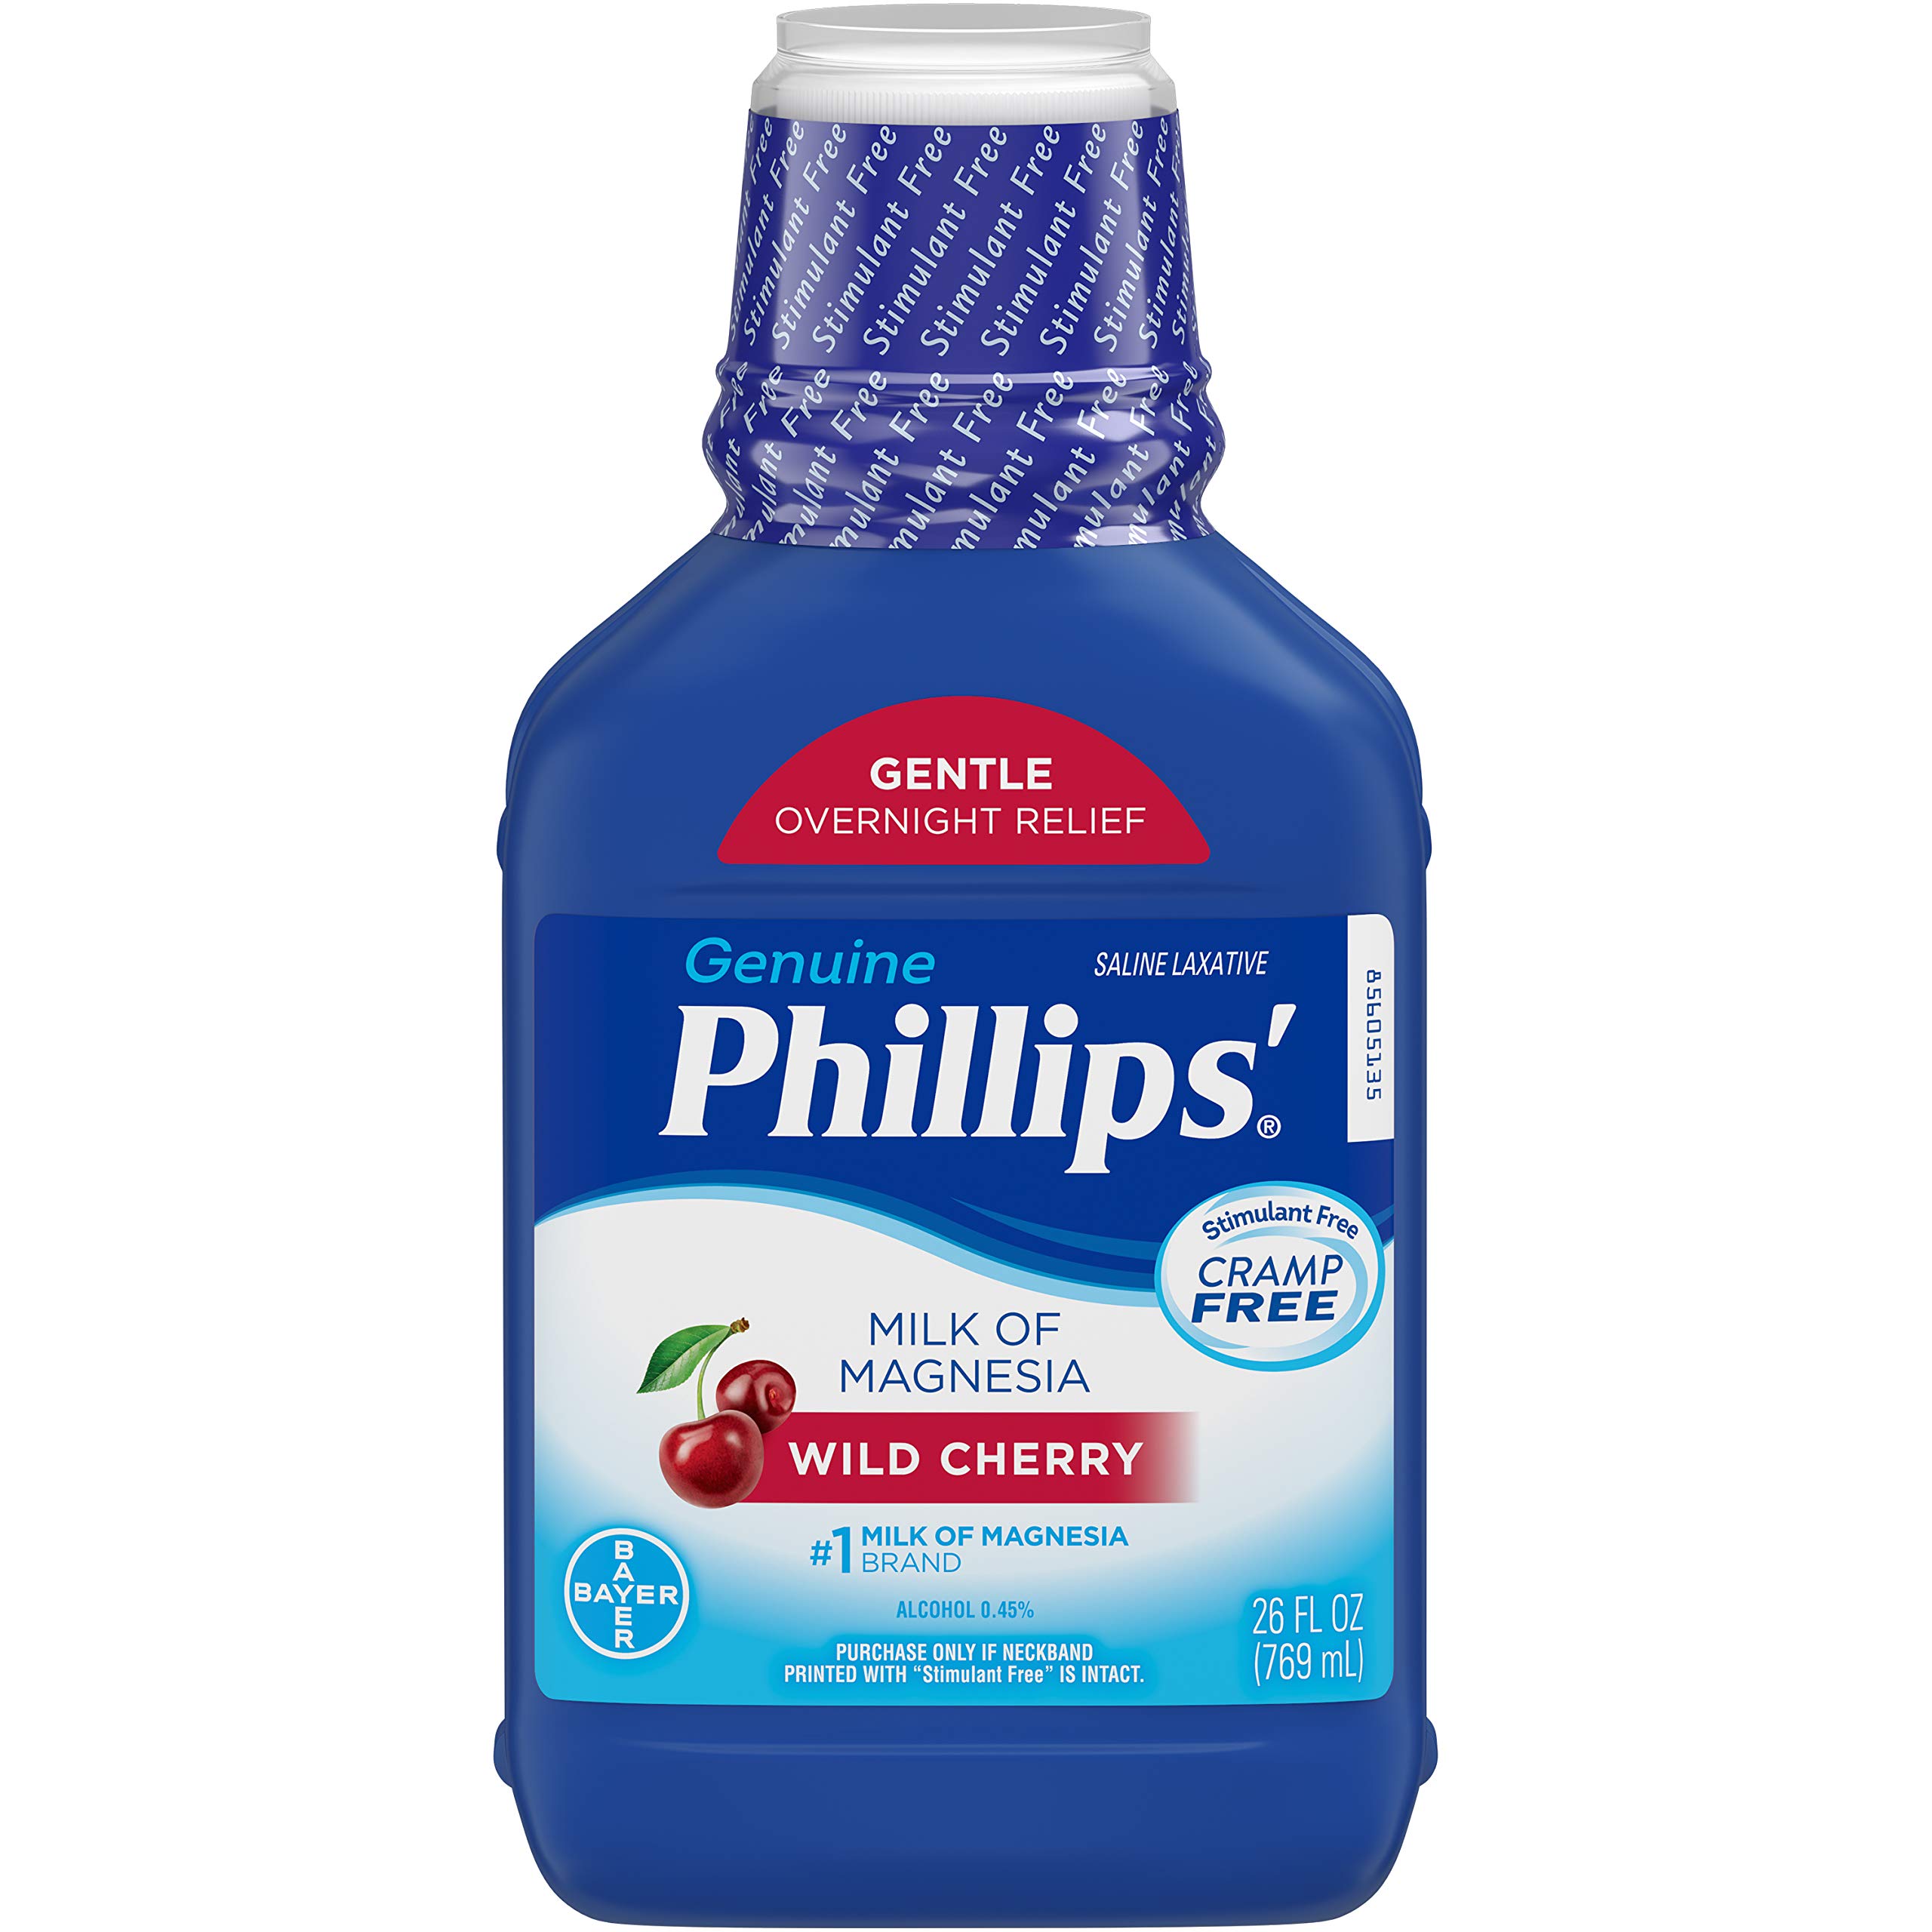 Phillips' Milk of Magnesia Liquid Laxative, Wild Cherry Flavor, Stimulant Free, Cramp Free Relief of Occasional Constipation, Effective in 30 minutes - 6 hours, #1 Milk of Magnesia Brand, 26 ounces